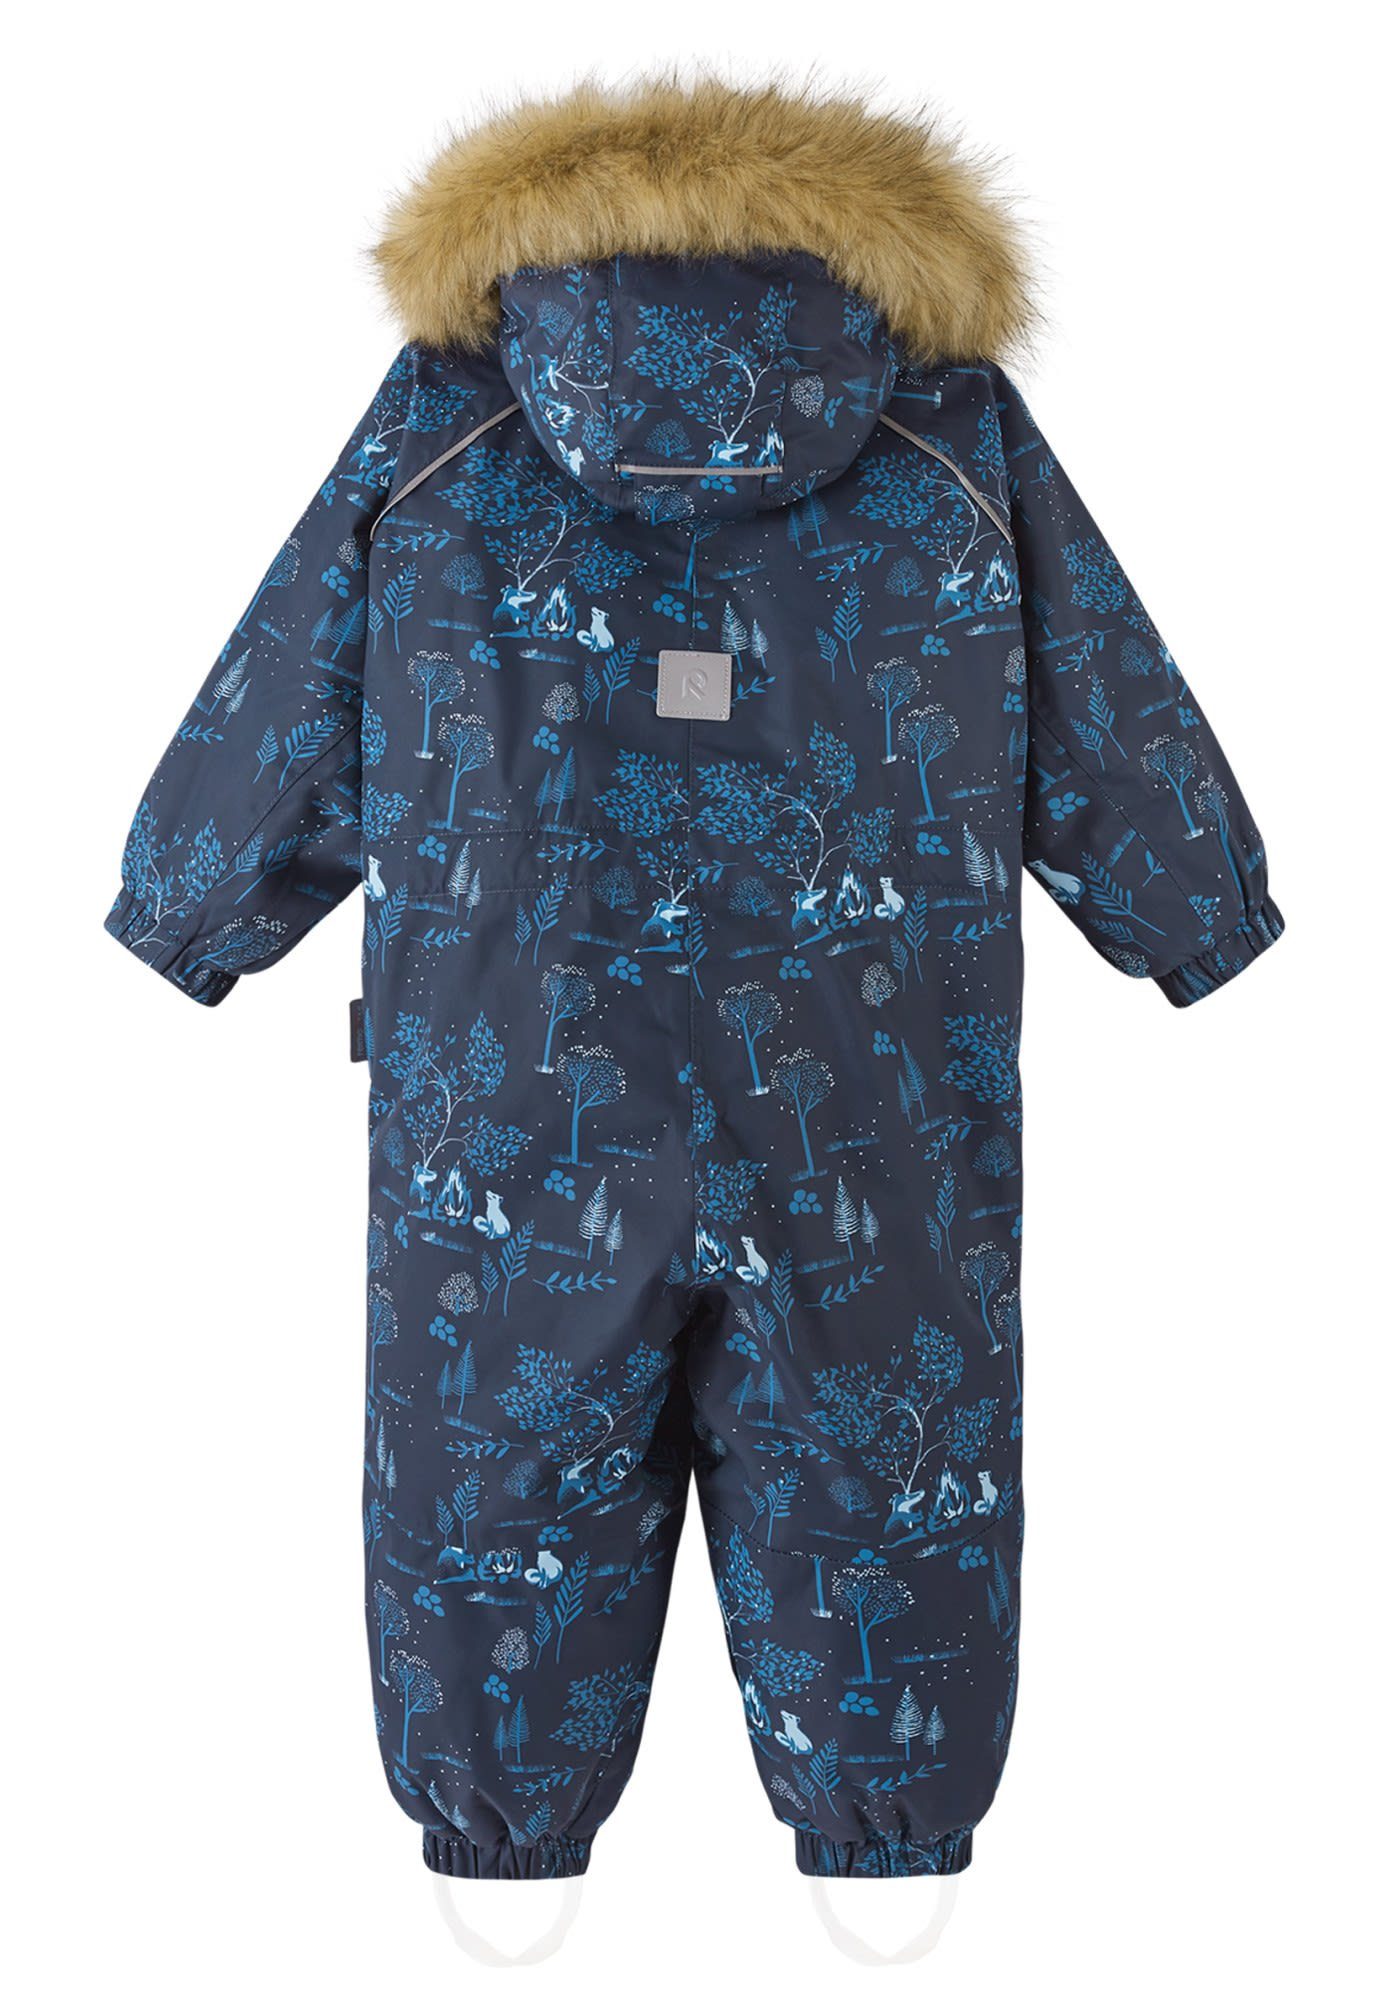 Toddlers Overall reima Kinder Reima Winter Lappi Navy Overall